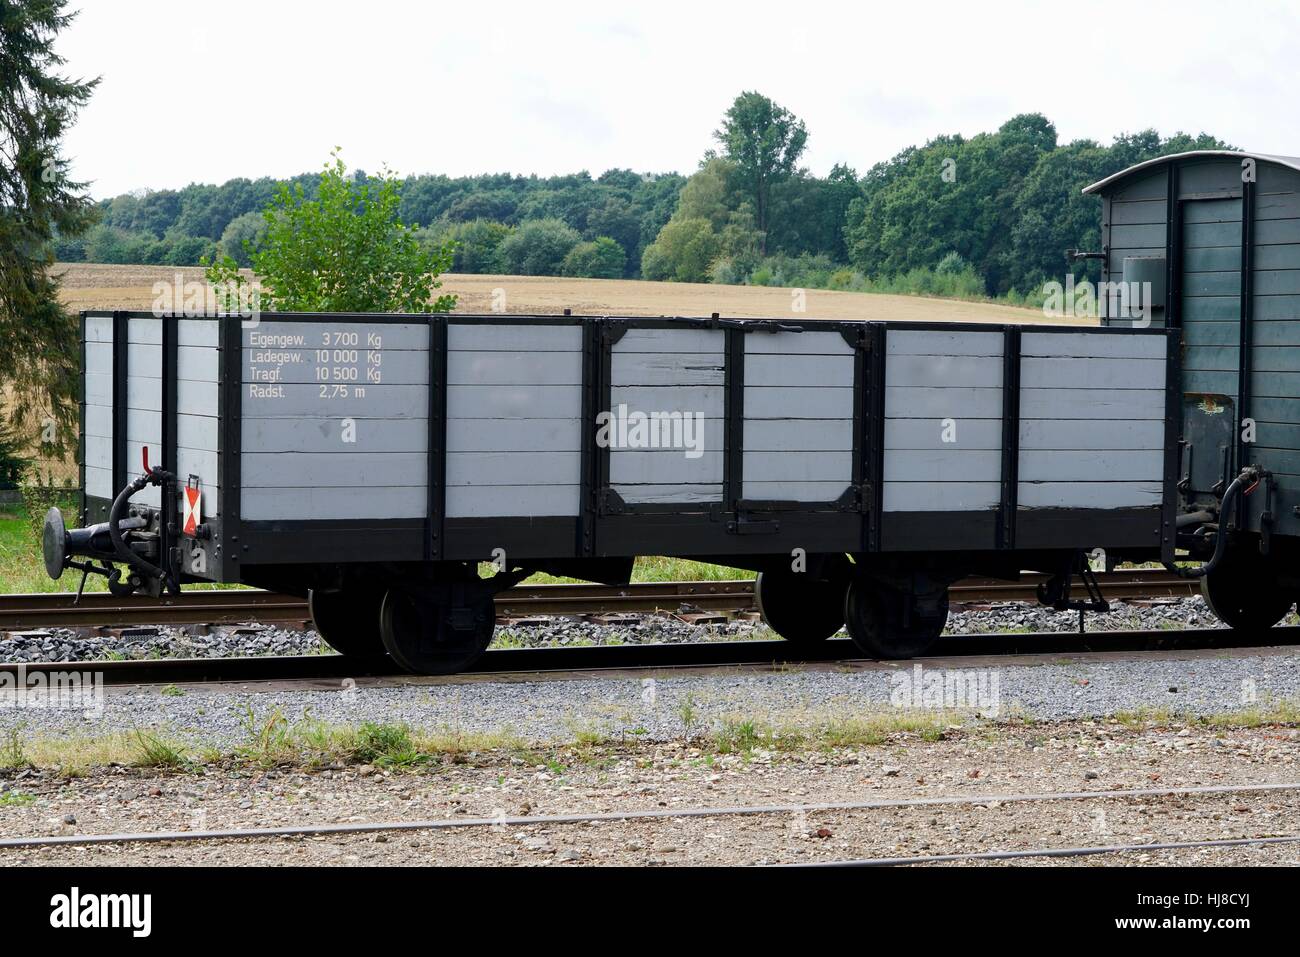 grey freight car of a historical railway Stock Photo